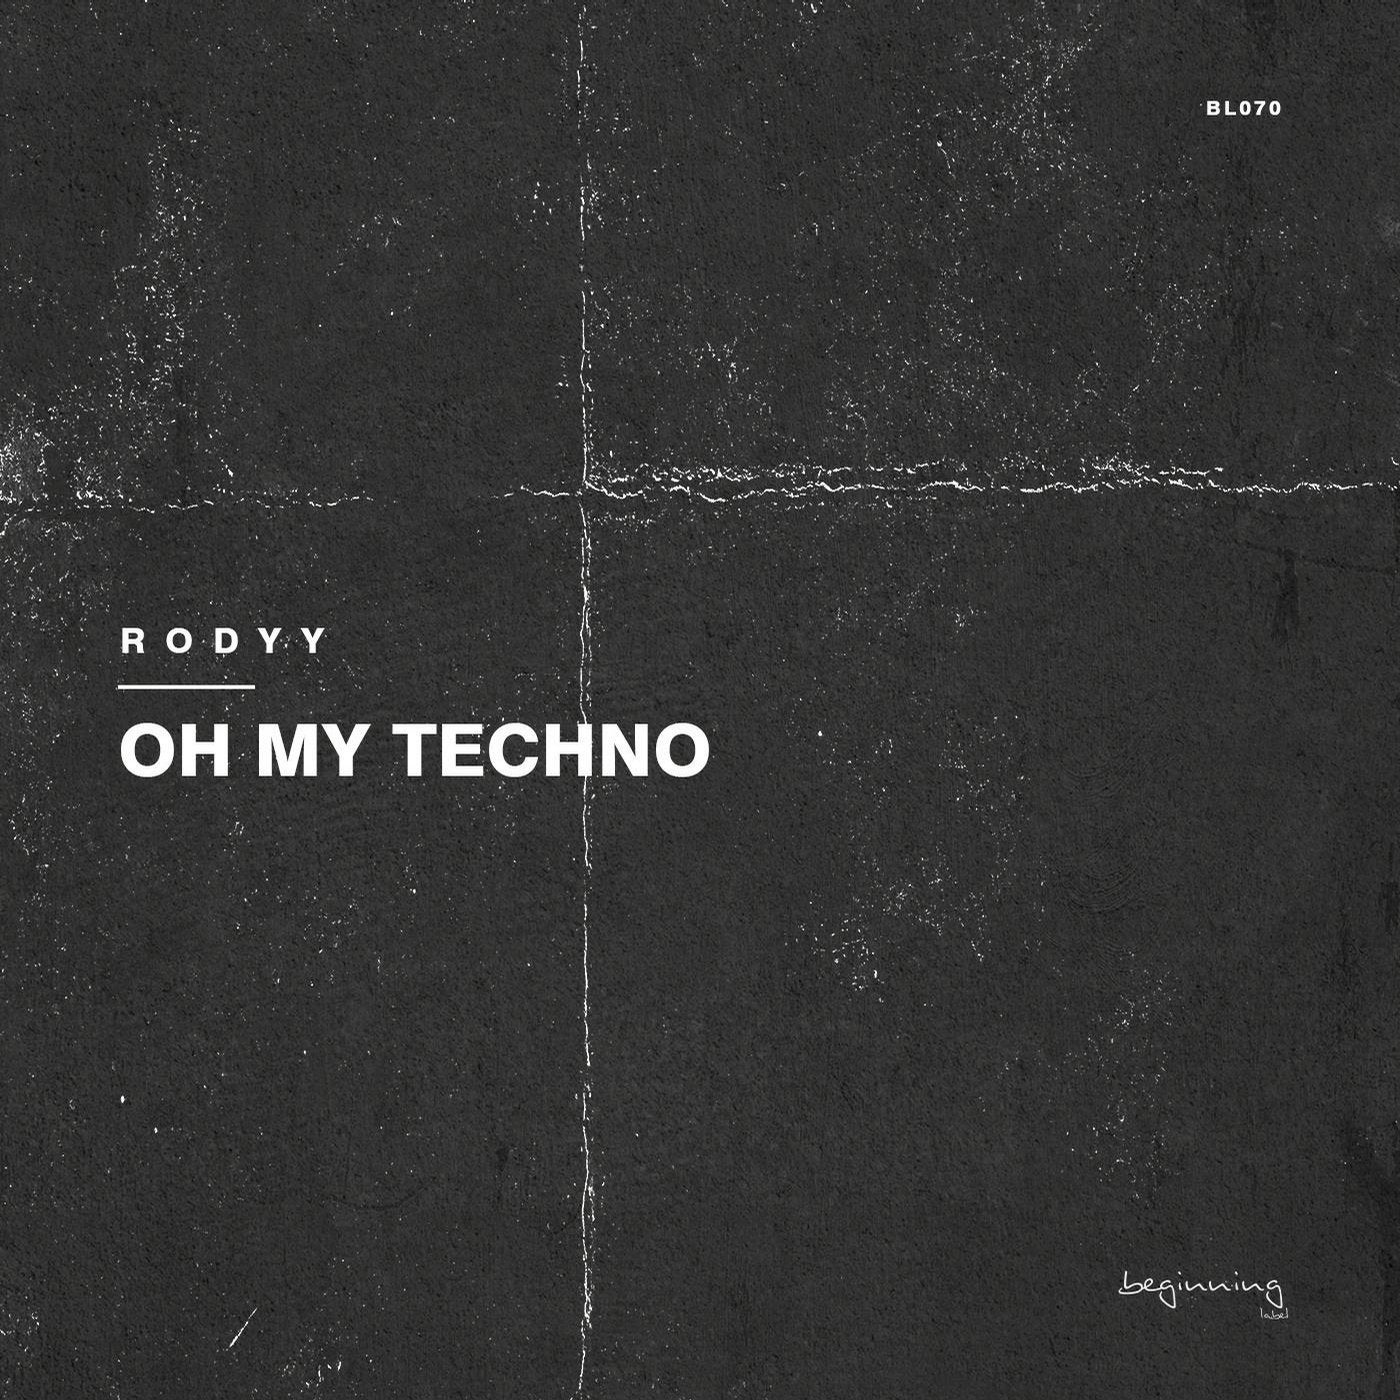 Oh My Techno EP